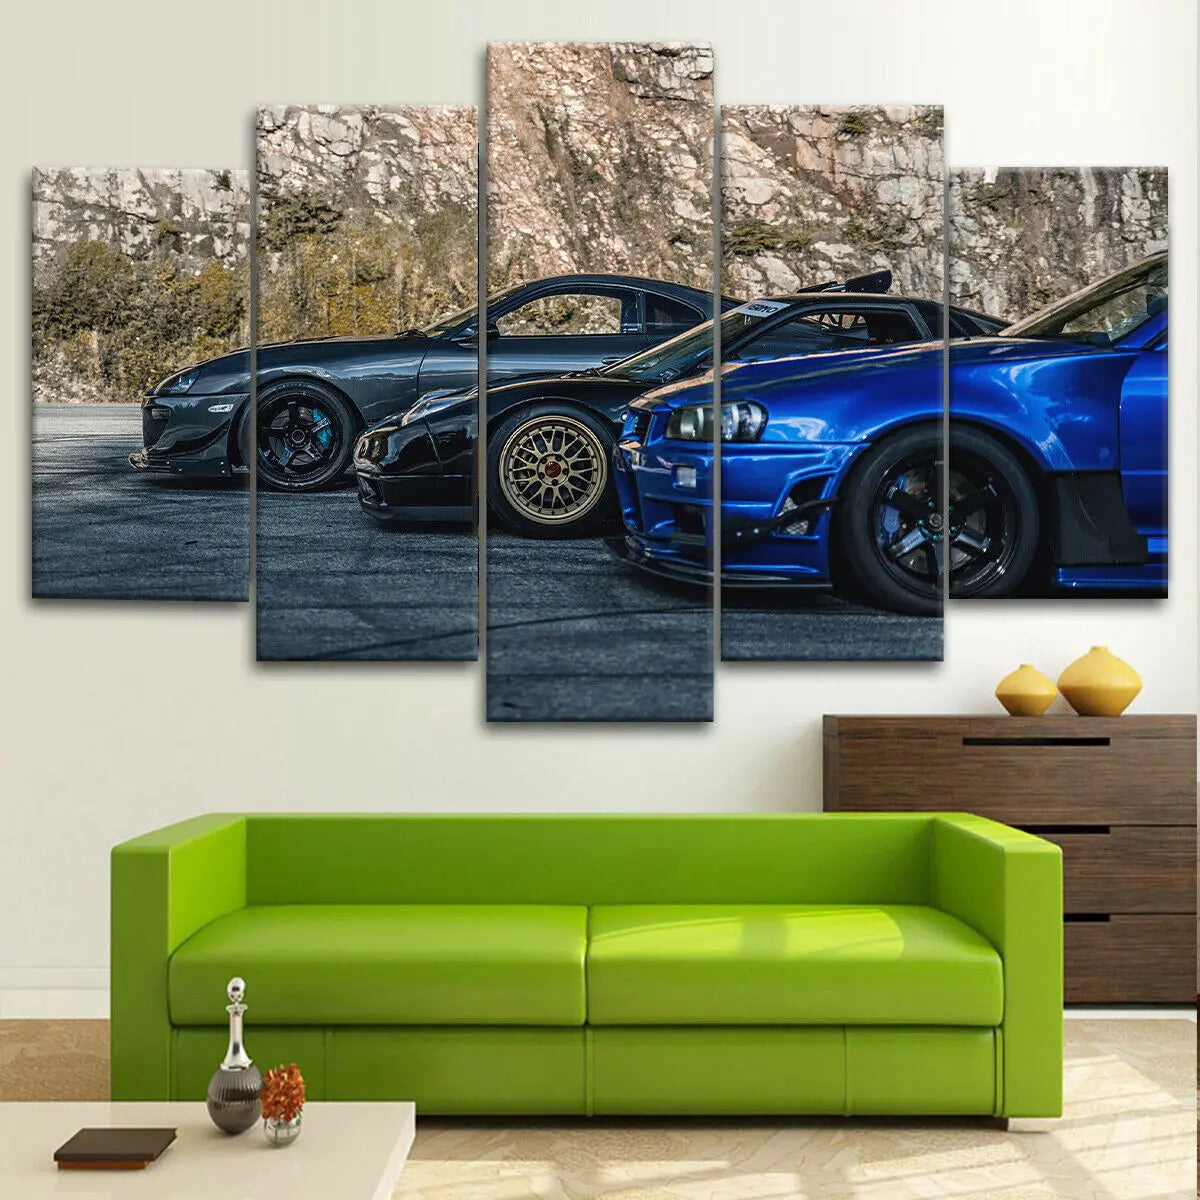 5 Pieces Wall Art Canvas Decor JDM Skyline NSX Supra Sports Car Poster Painting Living Room Wallpaper Bedroom Home Decoration